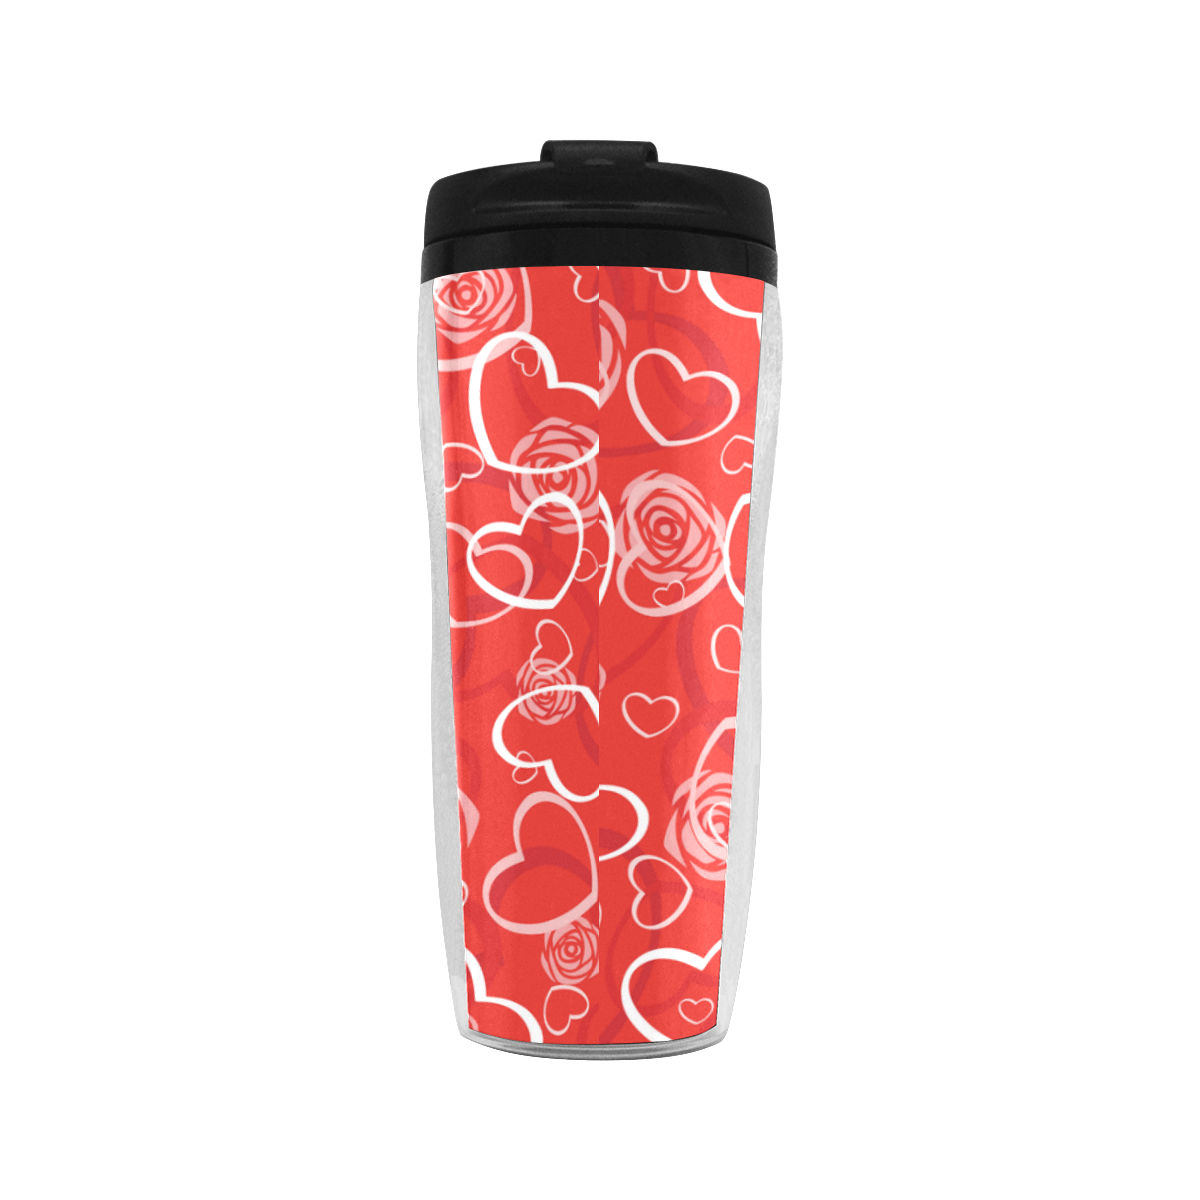 RED LOVE HEARTS Reusable Coffee Cup (11.8oz)